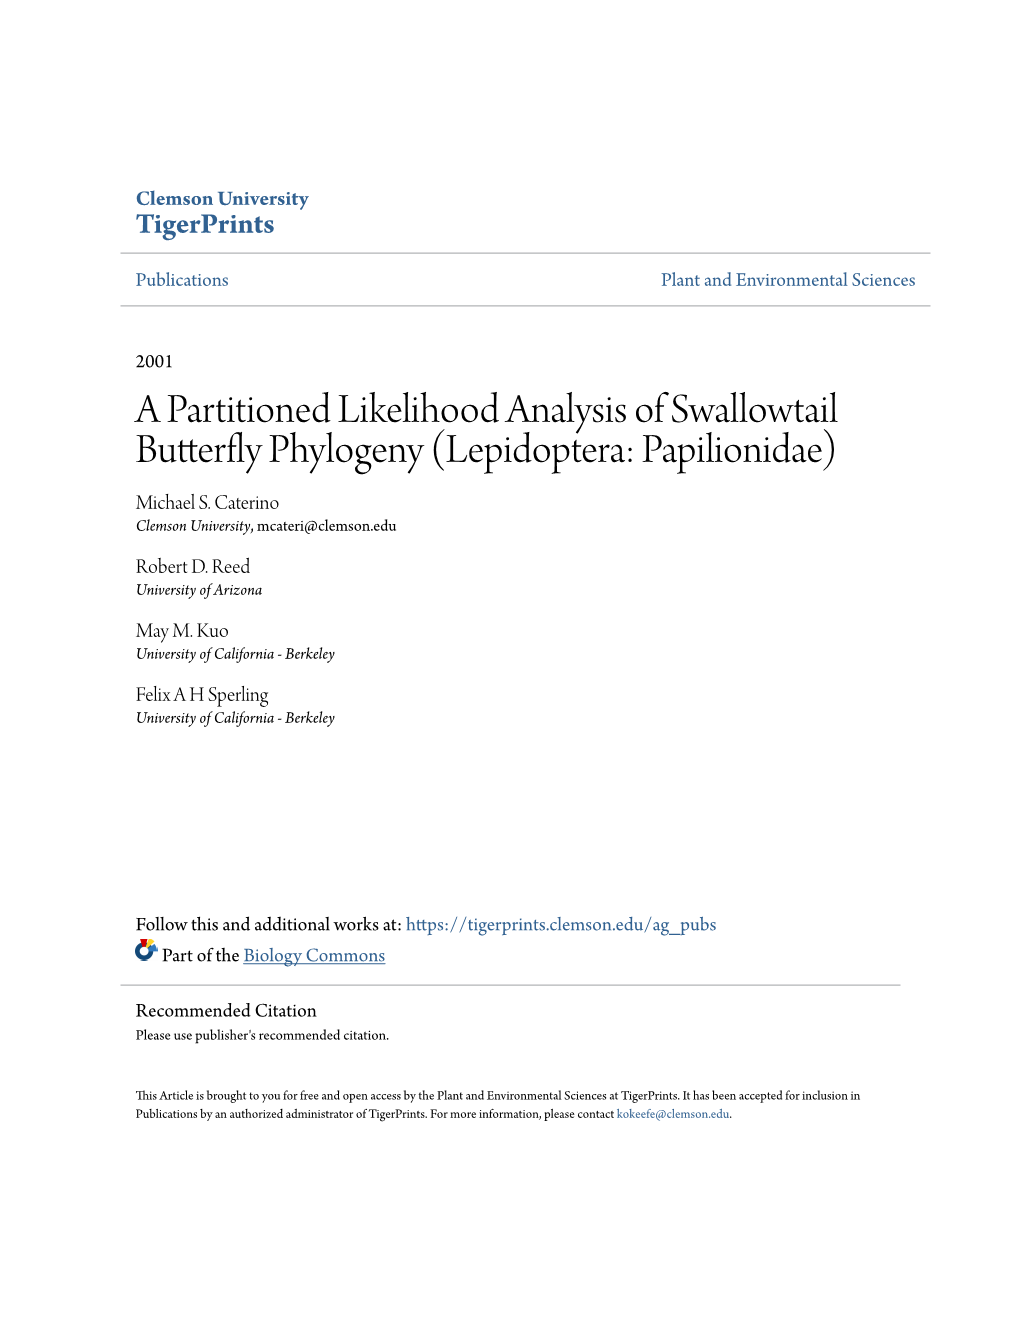 A Partitioned Likelihood Analysis of Swallowtail Butterfly Phylogeny (Lepidoptera: Papilionidae) Michael S